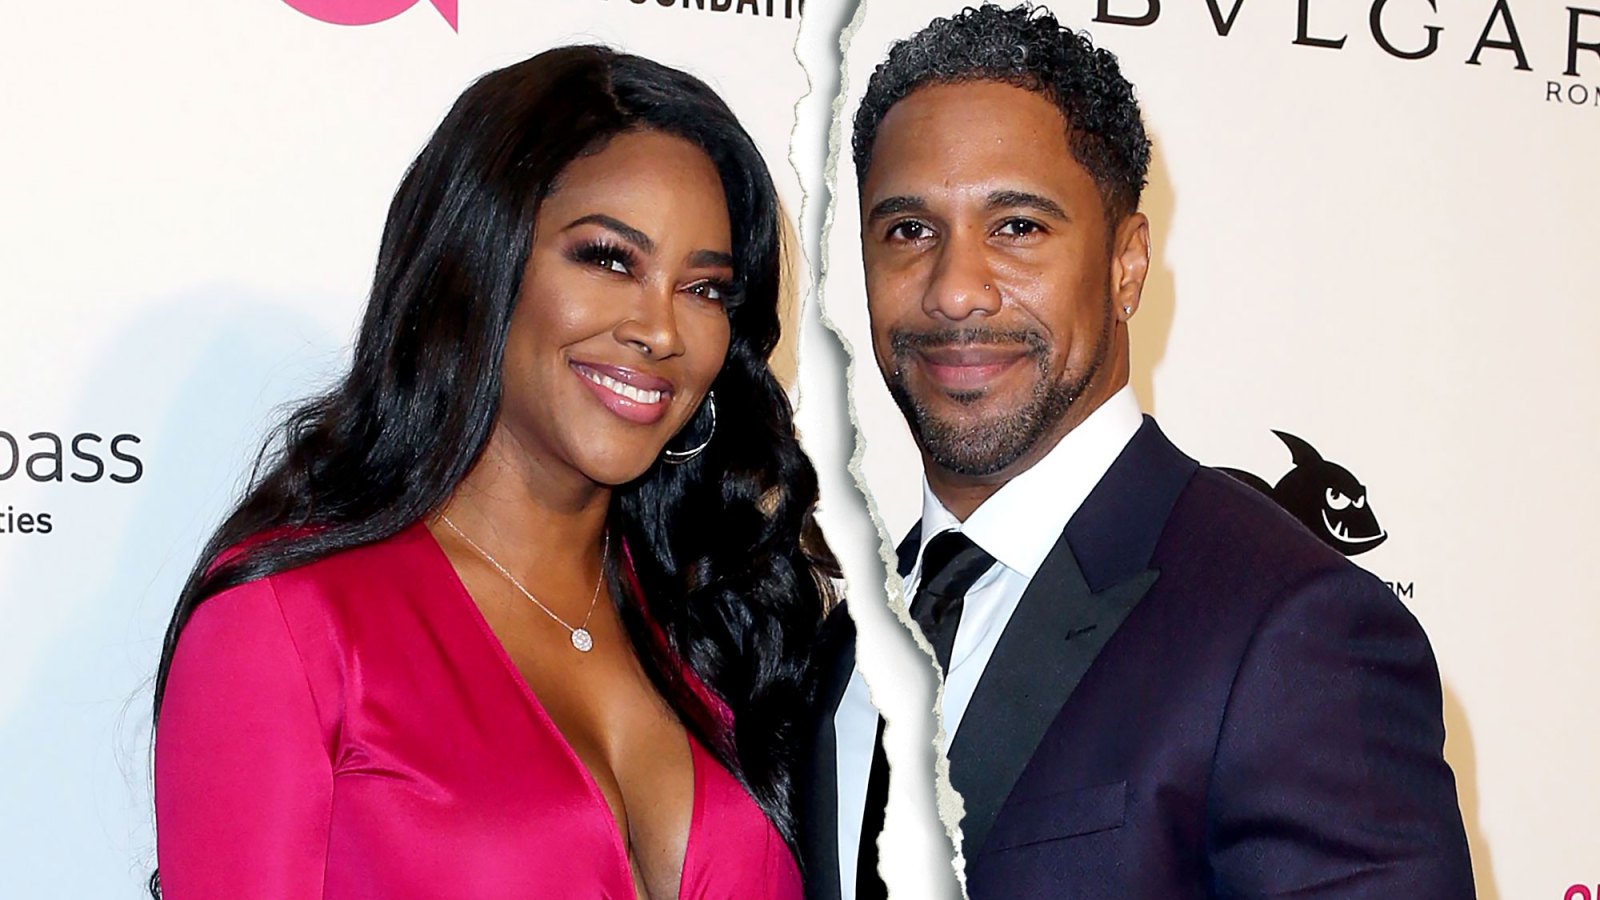 RHOA's Kenya Moore Reportedly Files for Divorce from Husband Marc Daly